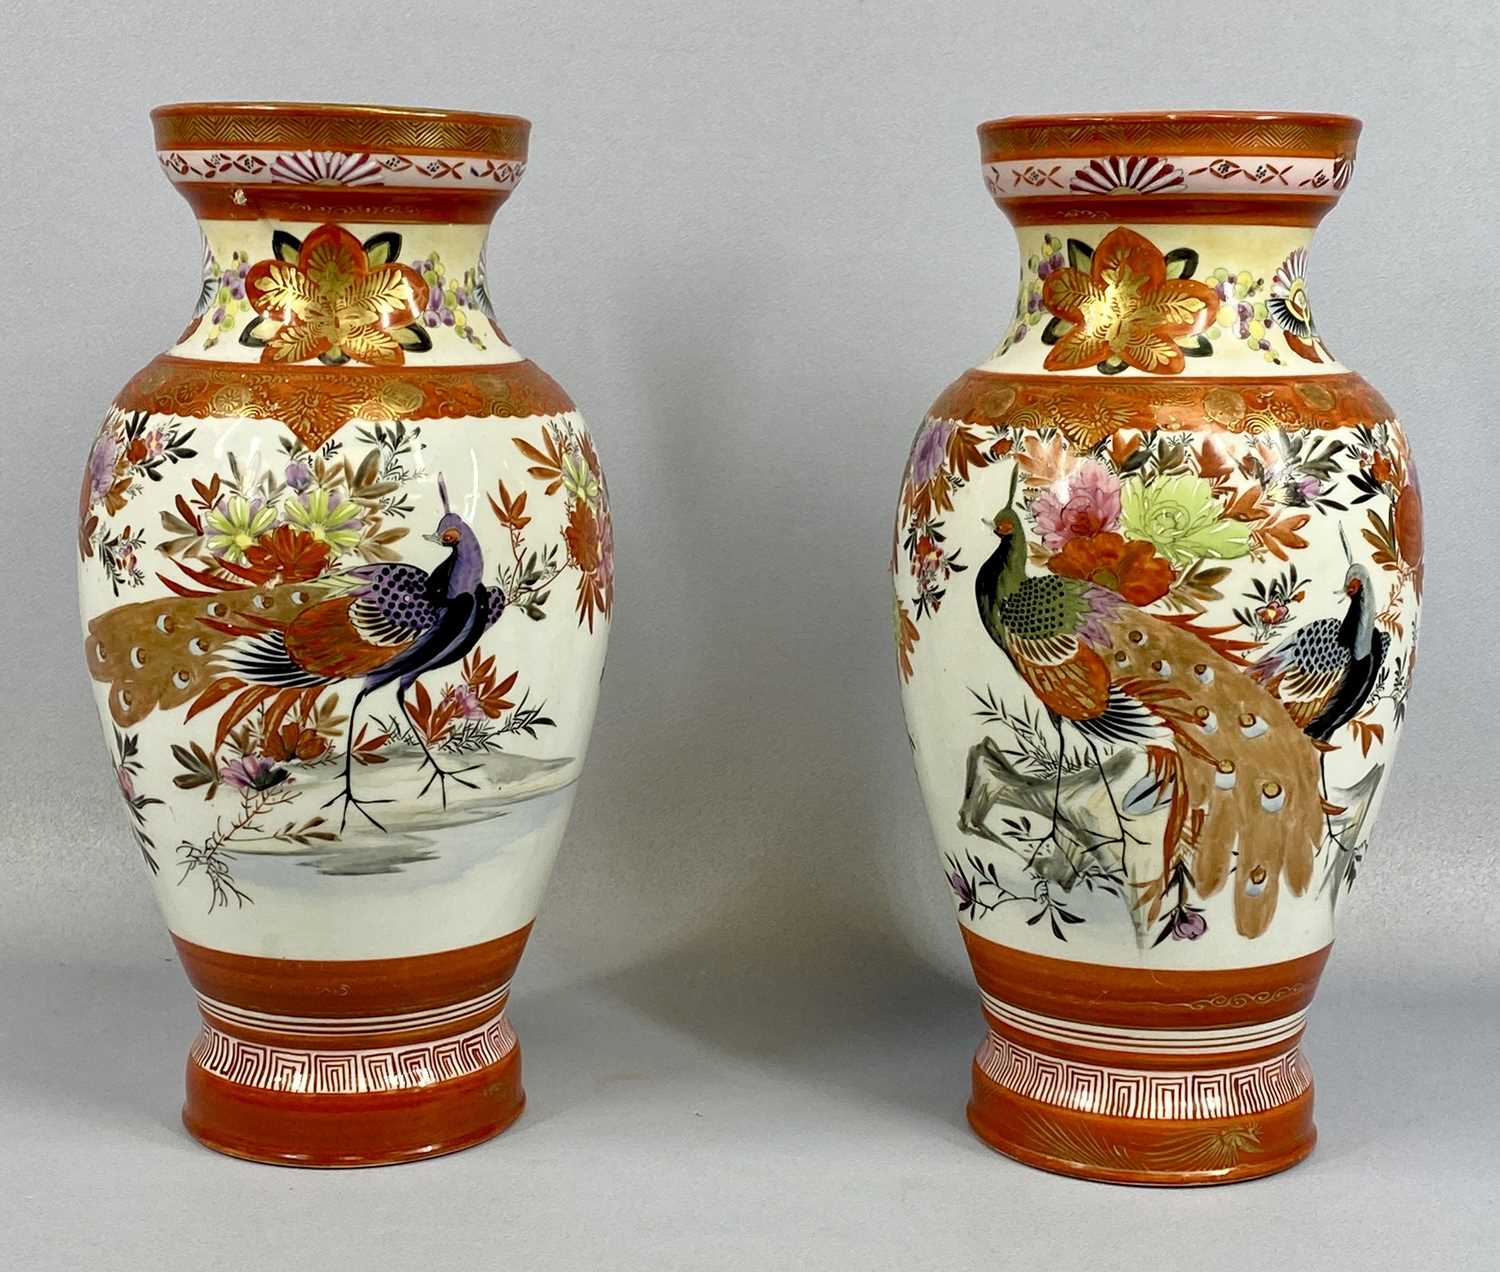 JAPANESE KUTANI VASES A PAIR, late 19th century, decorated with exotic birds and flowers, signed